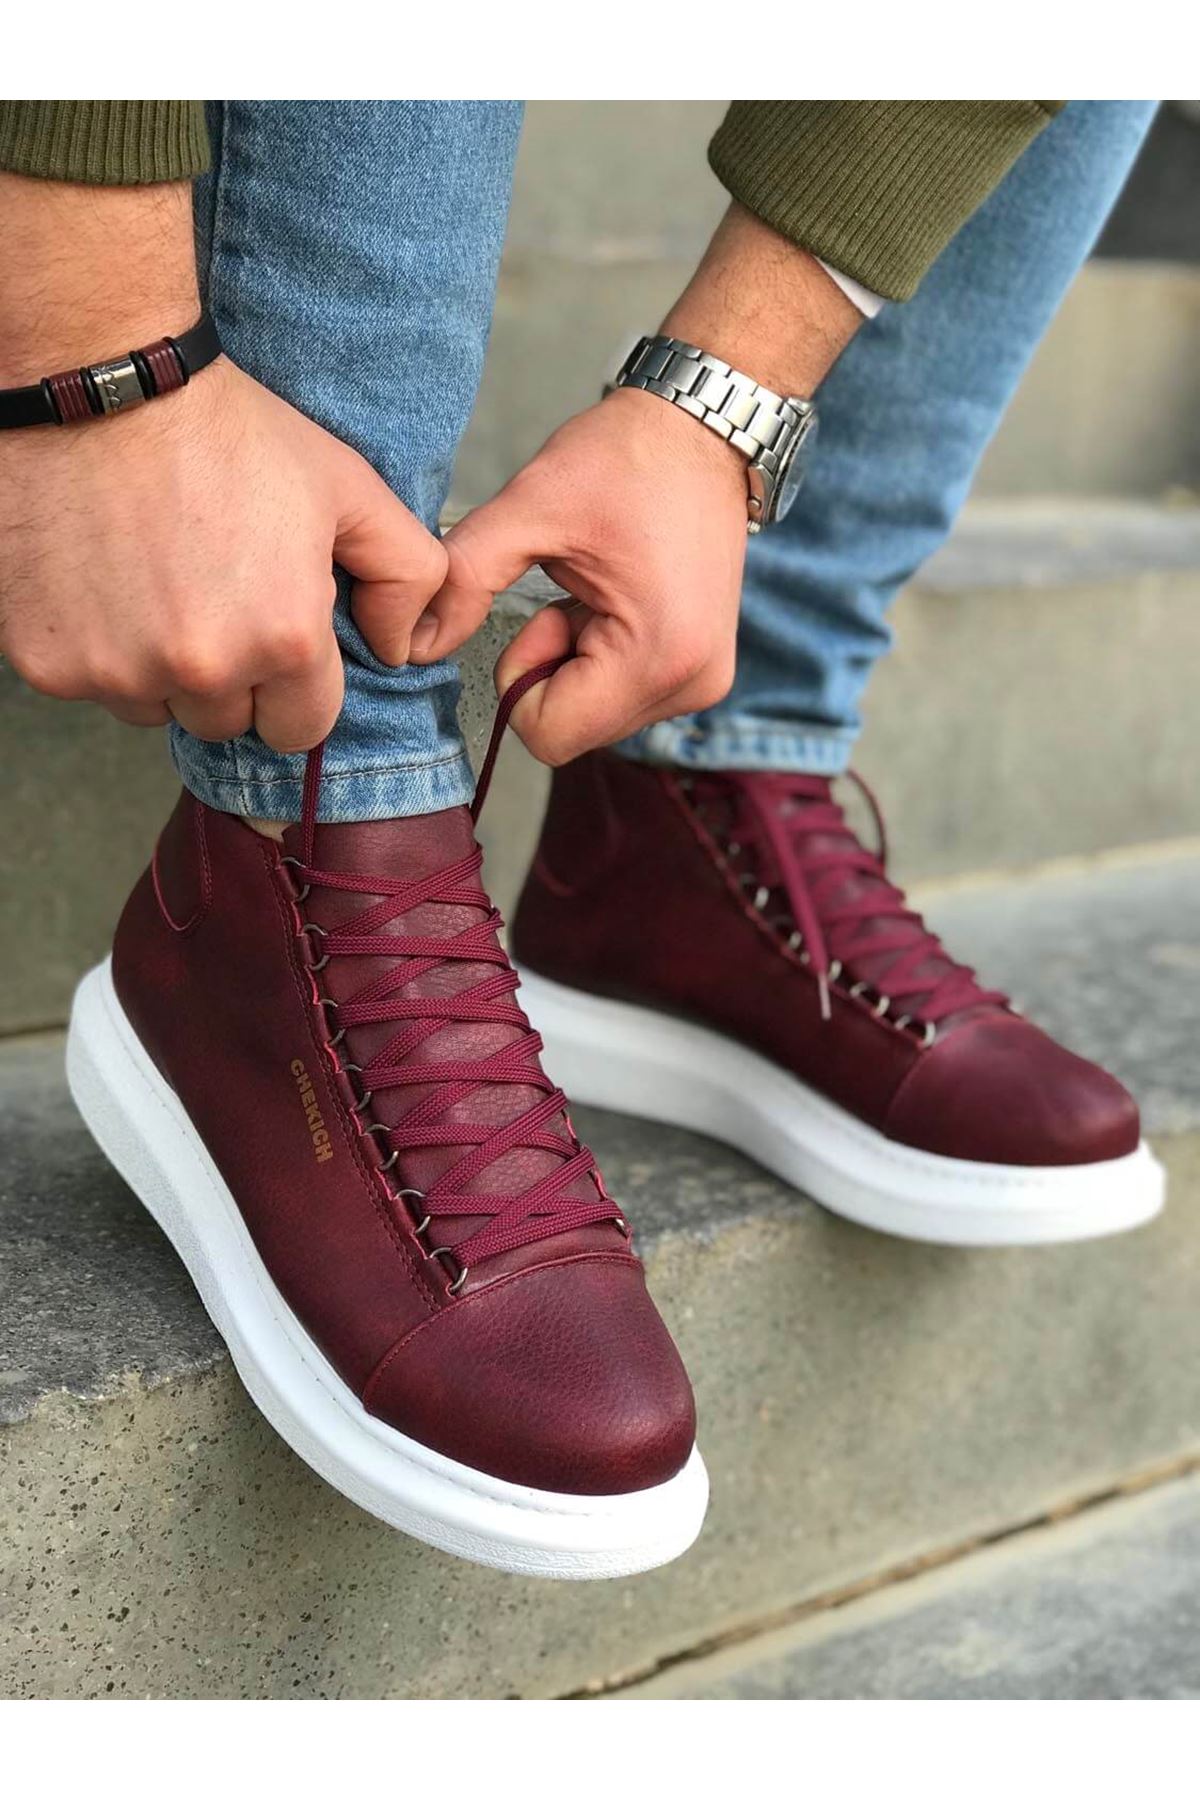 Chekich Men's and Women's Shoes Claret Red Faux Leather Fall Season Lace Up Unisex Sneakers Comfortable Ankle Gentlemen's Fashion Office Trekking Outdoor Light Odorless Breathable Warm Boots Non Slip Snow CH258 V2